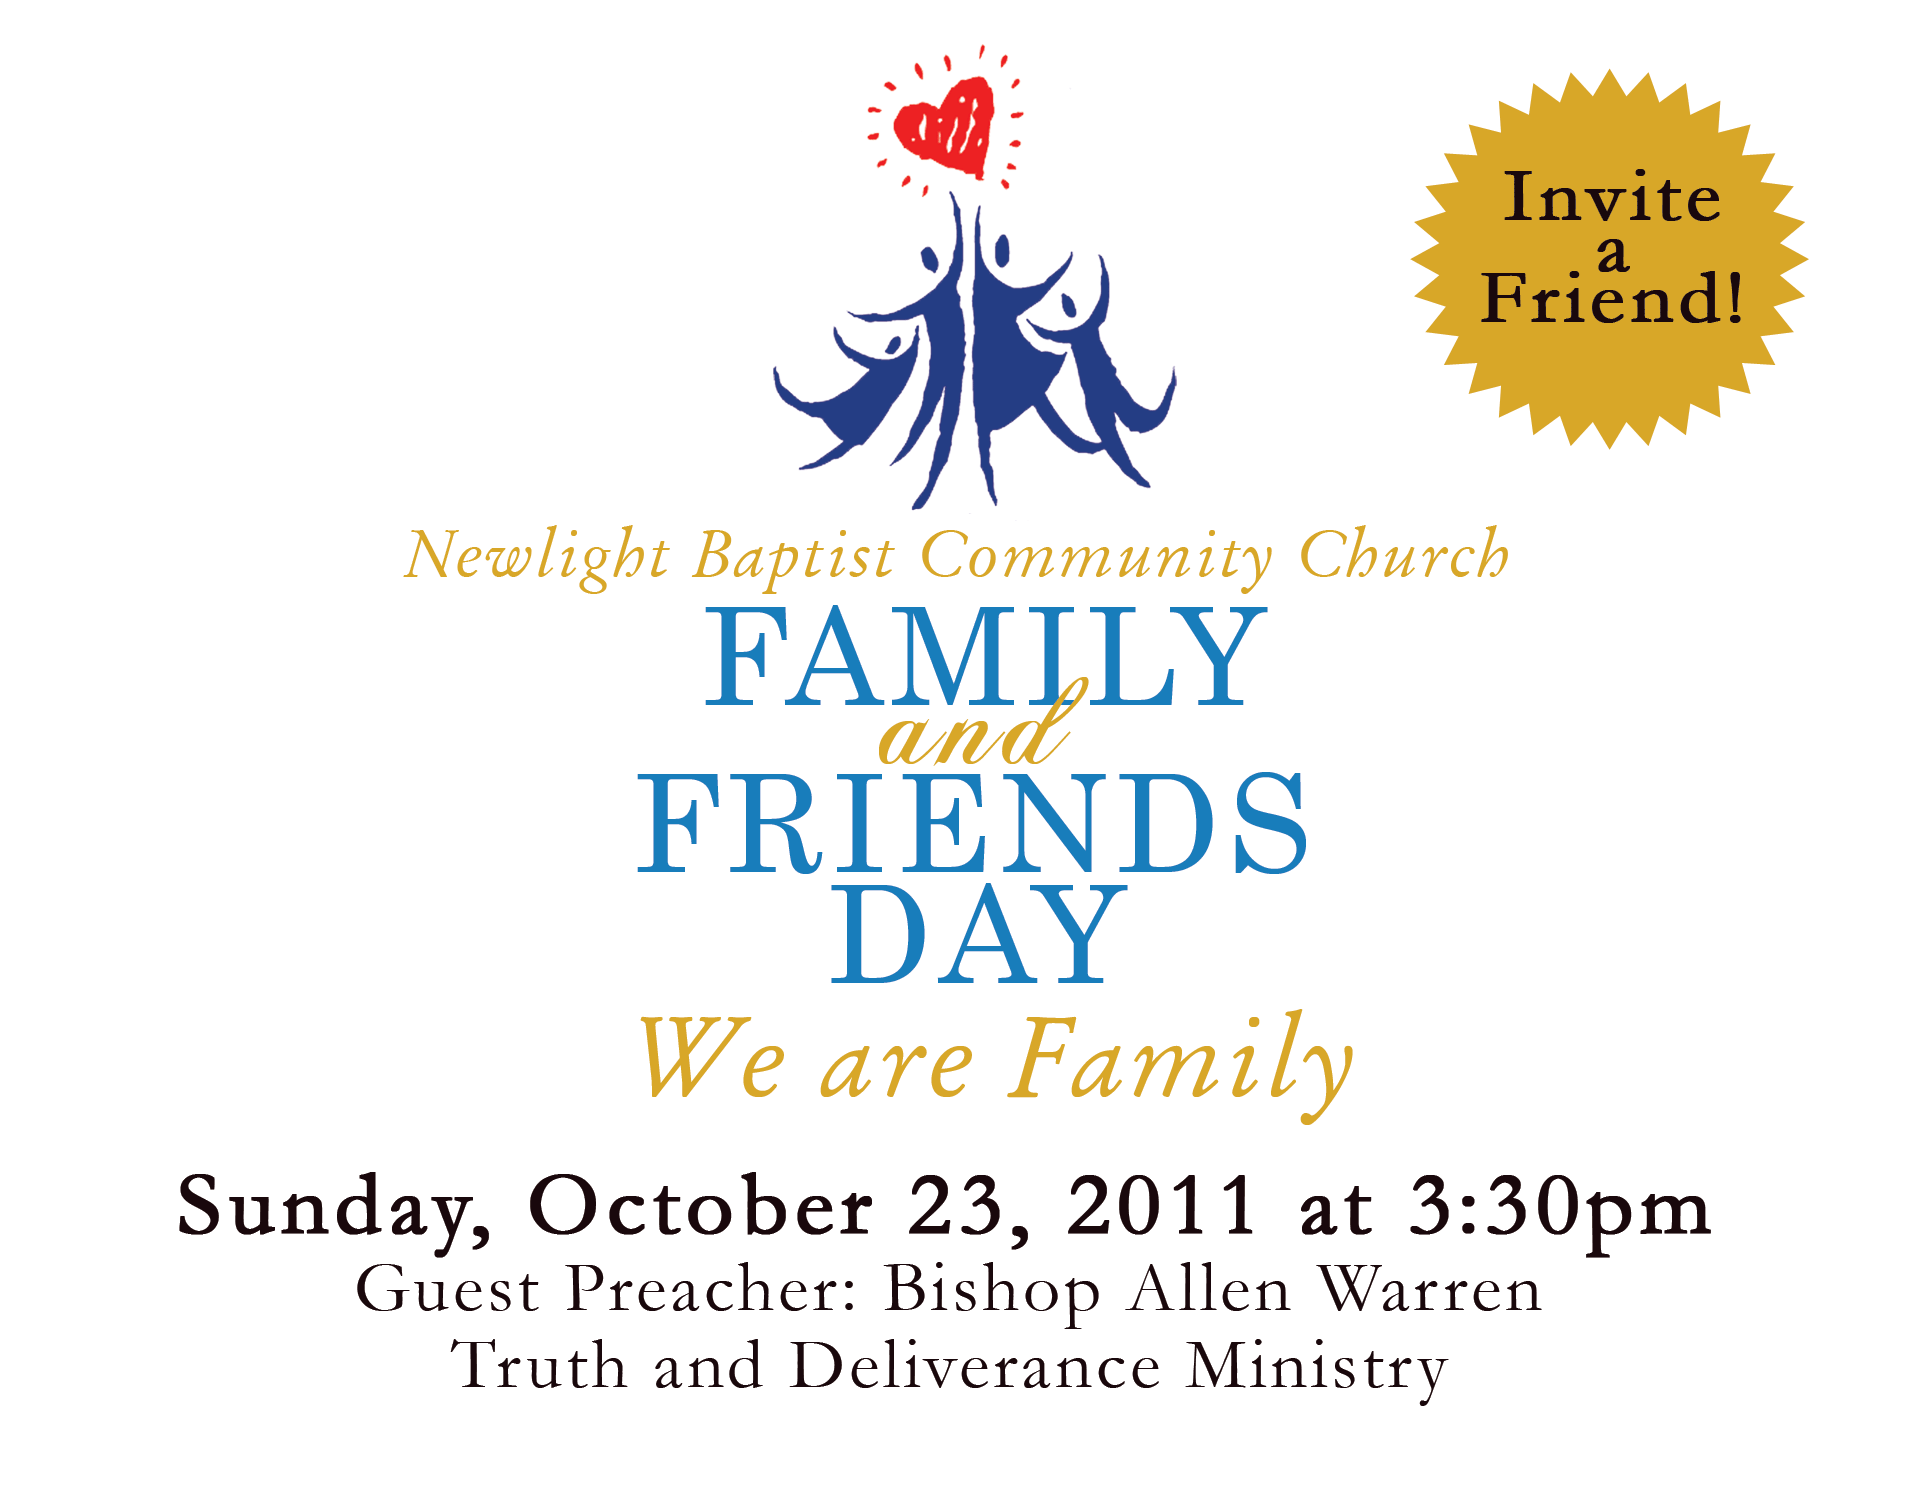 clipart for family and friends day - photo #20